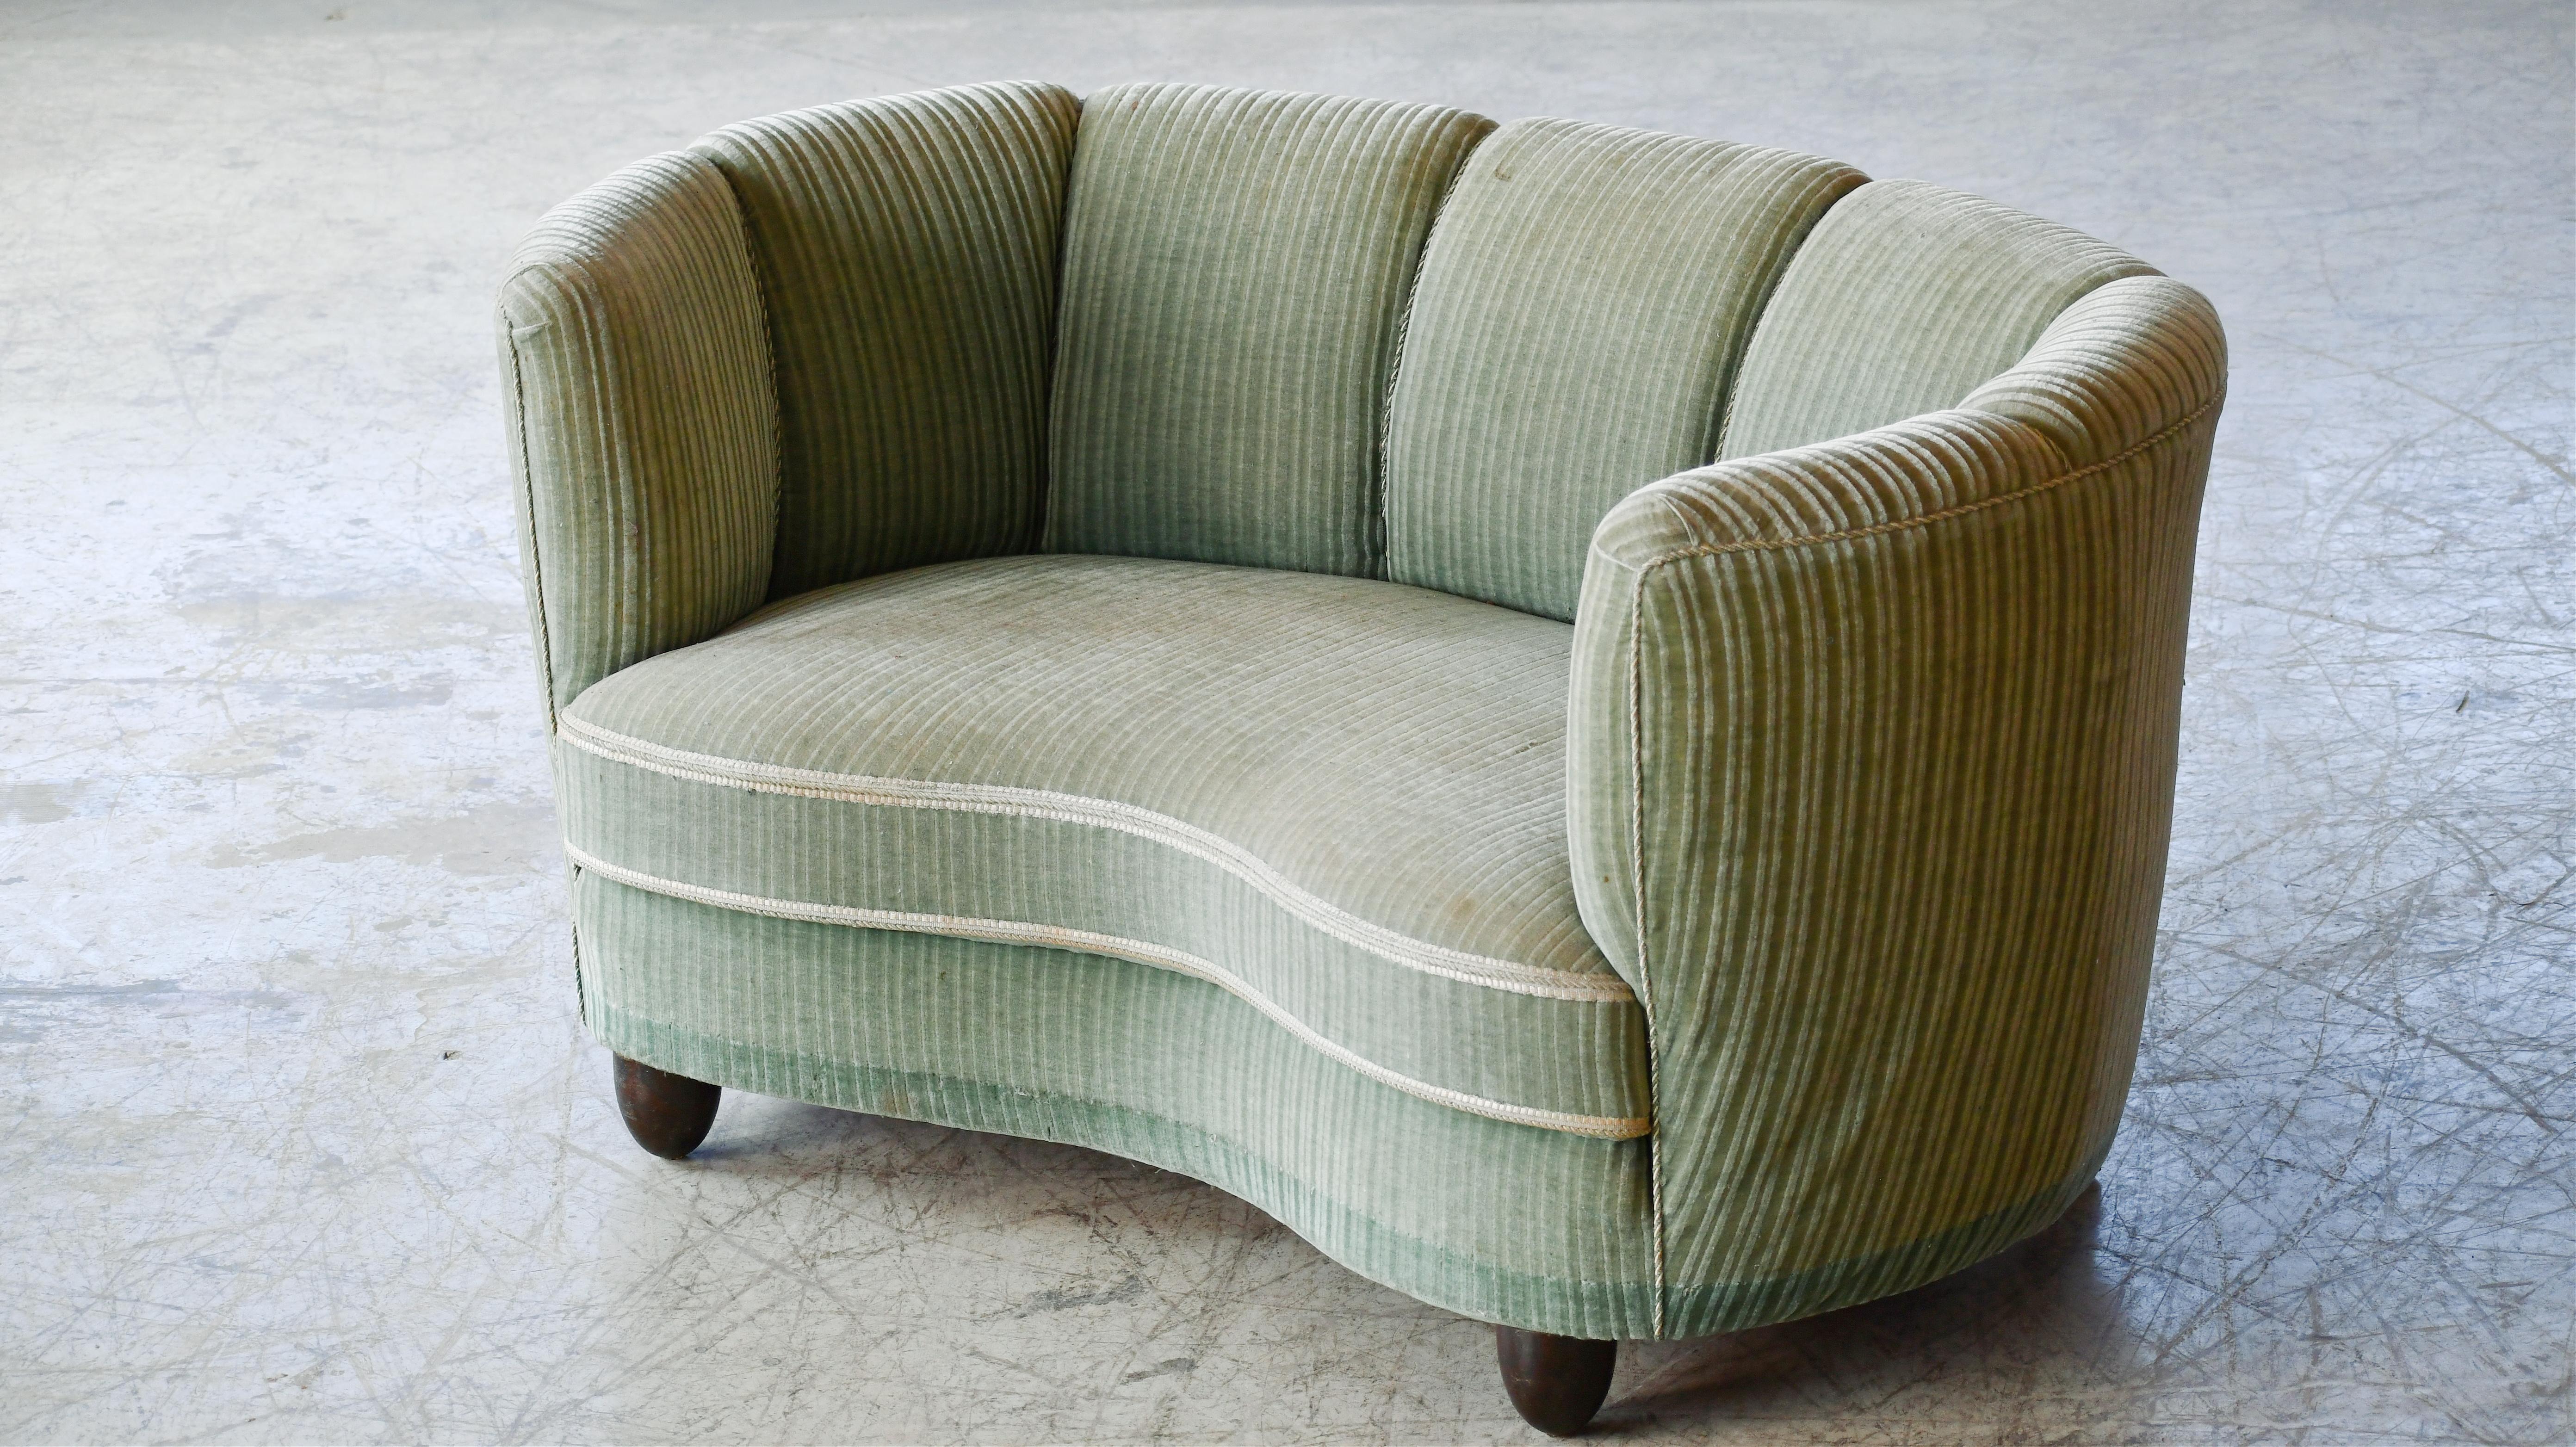 Danish Curved Banana Shape Loveseat or Sofa in Two-Tone Wool, Denmark, 1940s For Sale